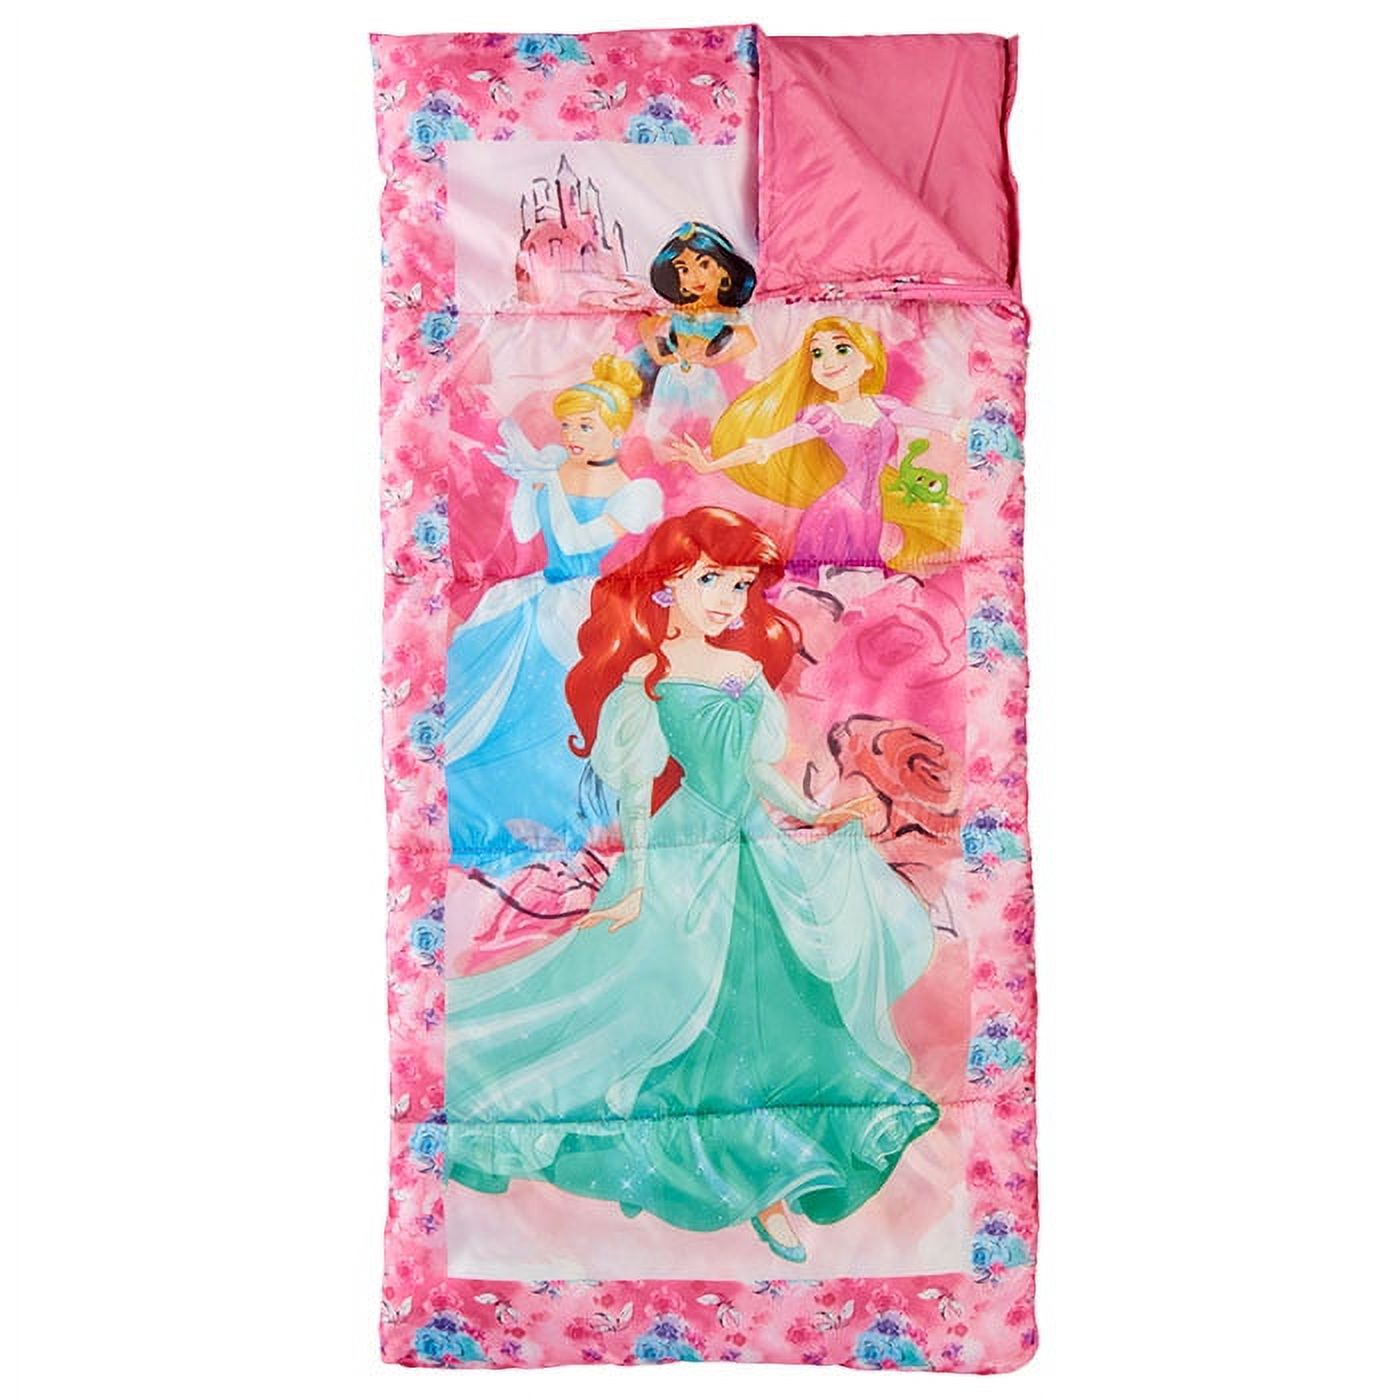 Disney Princess Kid's Indoor/Outdoor Unisex 4-Piece Sling Kit, Ages 4+, Multi-Color, Dome Tent, One Room - image 3 of 8